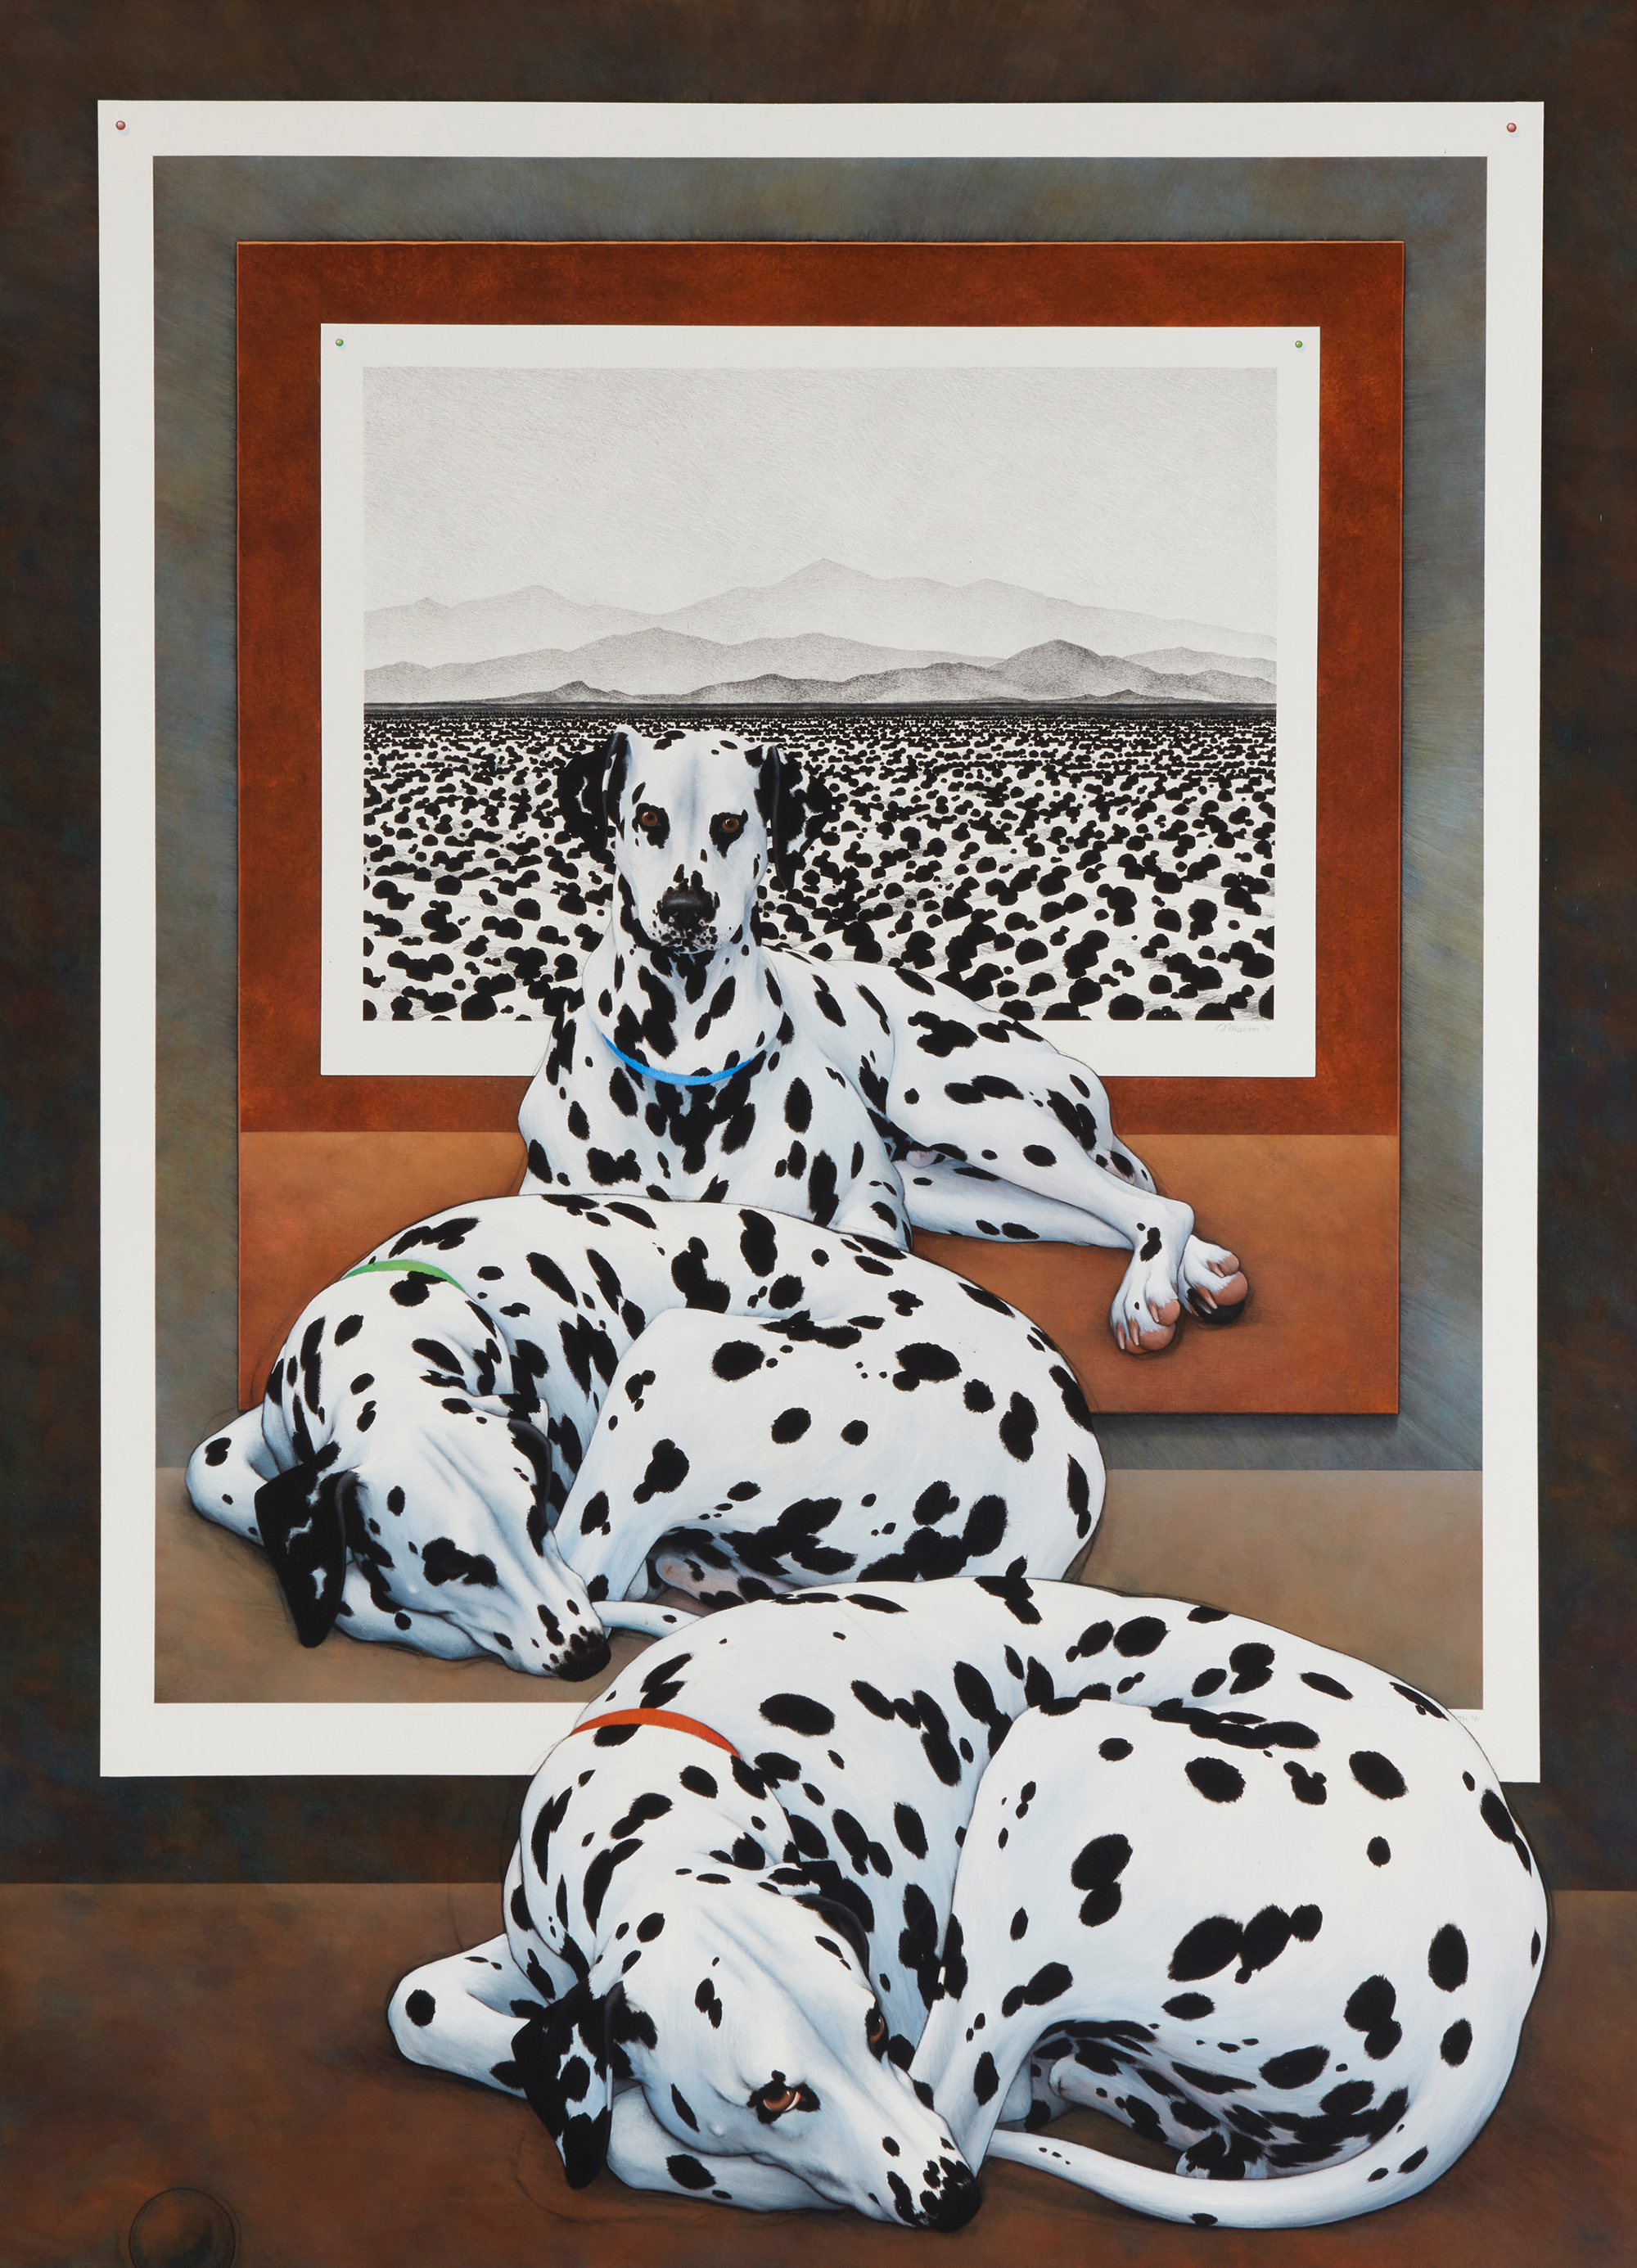  Dick Mason, ‘Painting of a dog in front of a print of a dog …,’ est. $8,000-$12,000